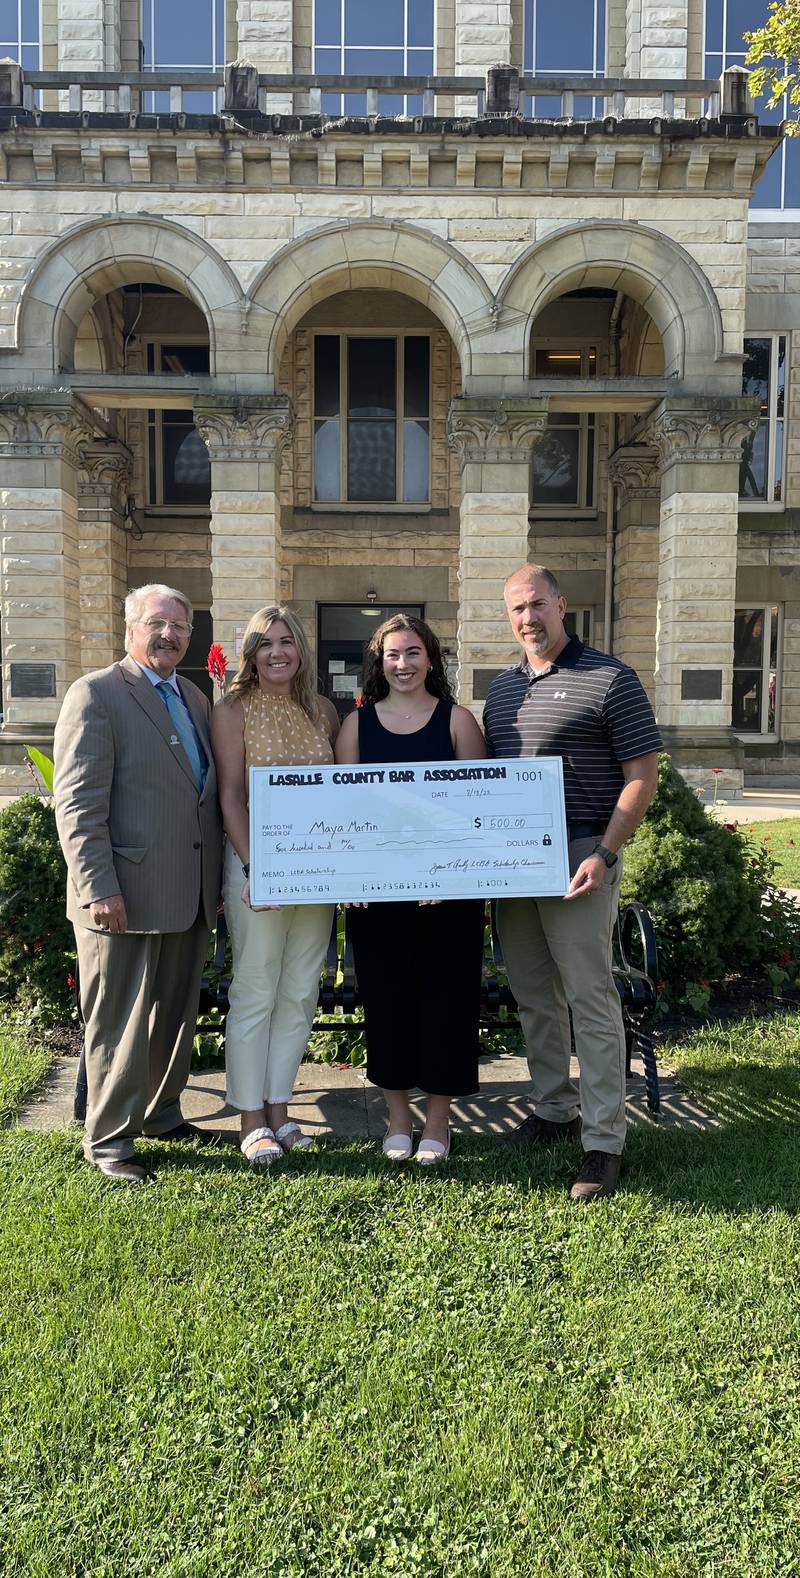 Maya Martin, of Mendota, was the recipient of a $500 scholarship sponsored by the La Salle County Bar Association. (From left) are attorney Jim Reilly, scholarship chairman, and parents Lisa and Jason Martin.